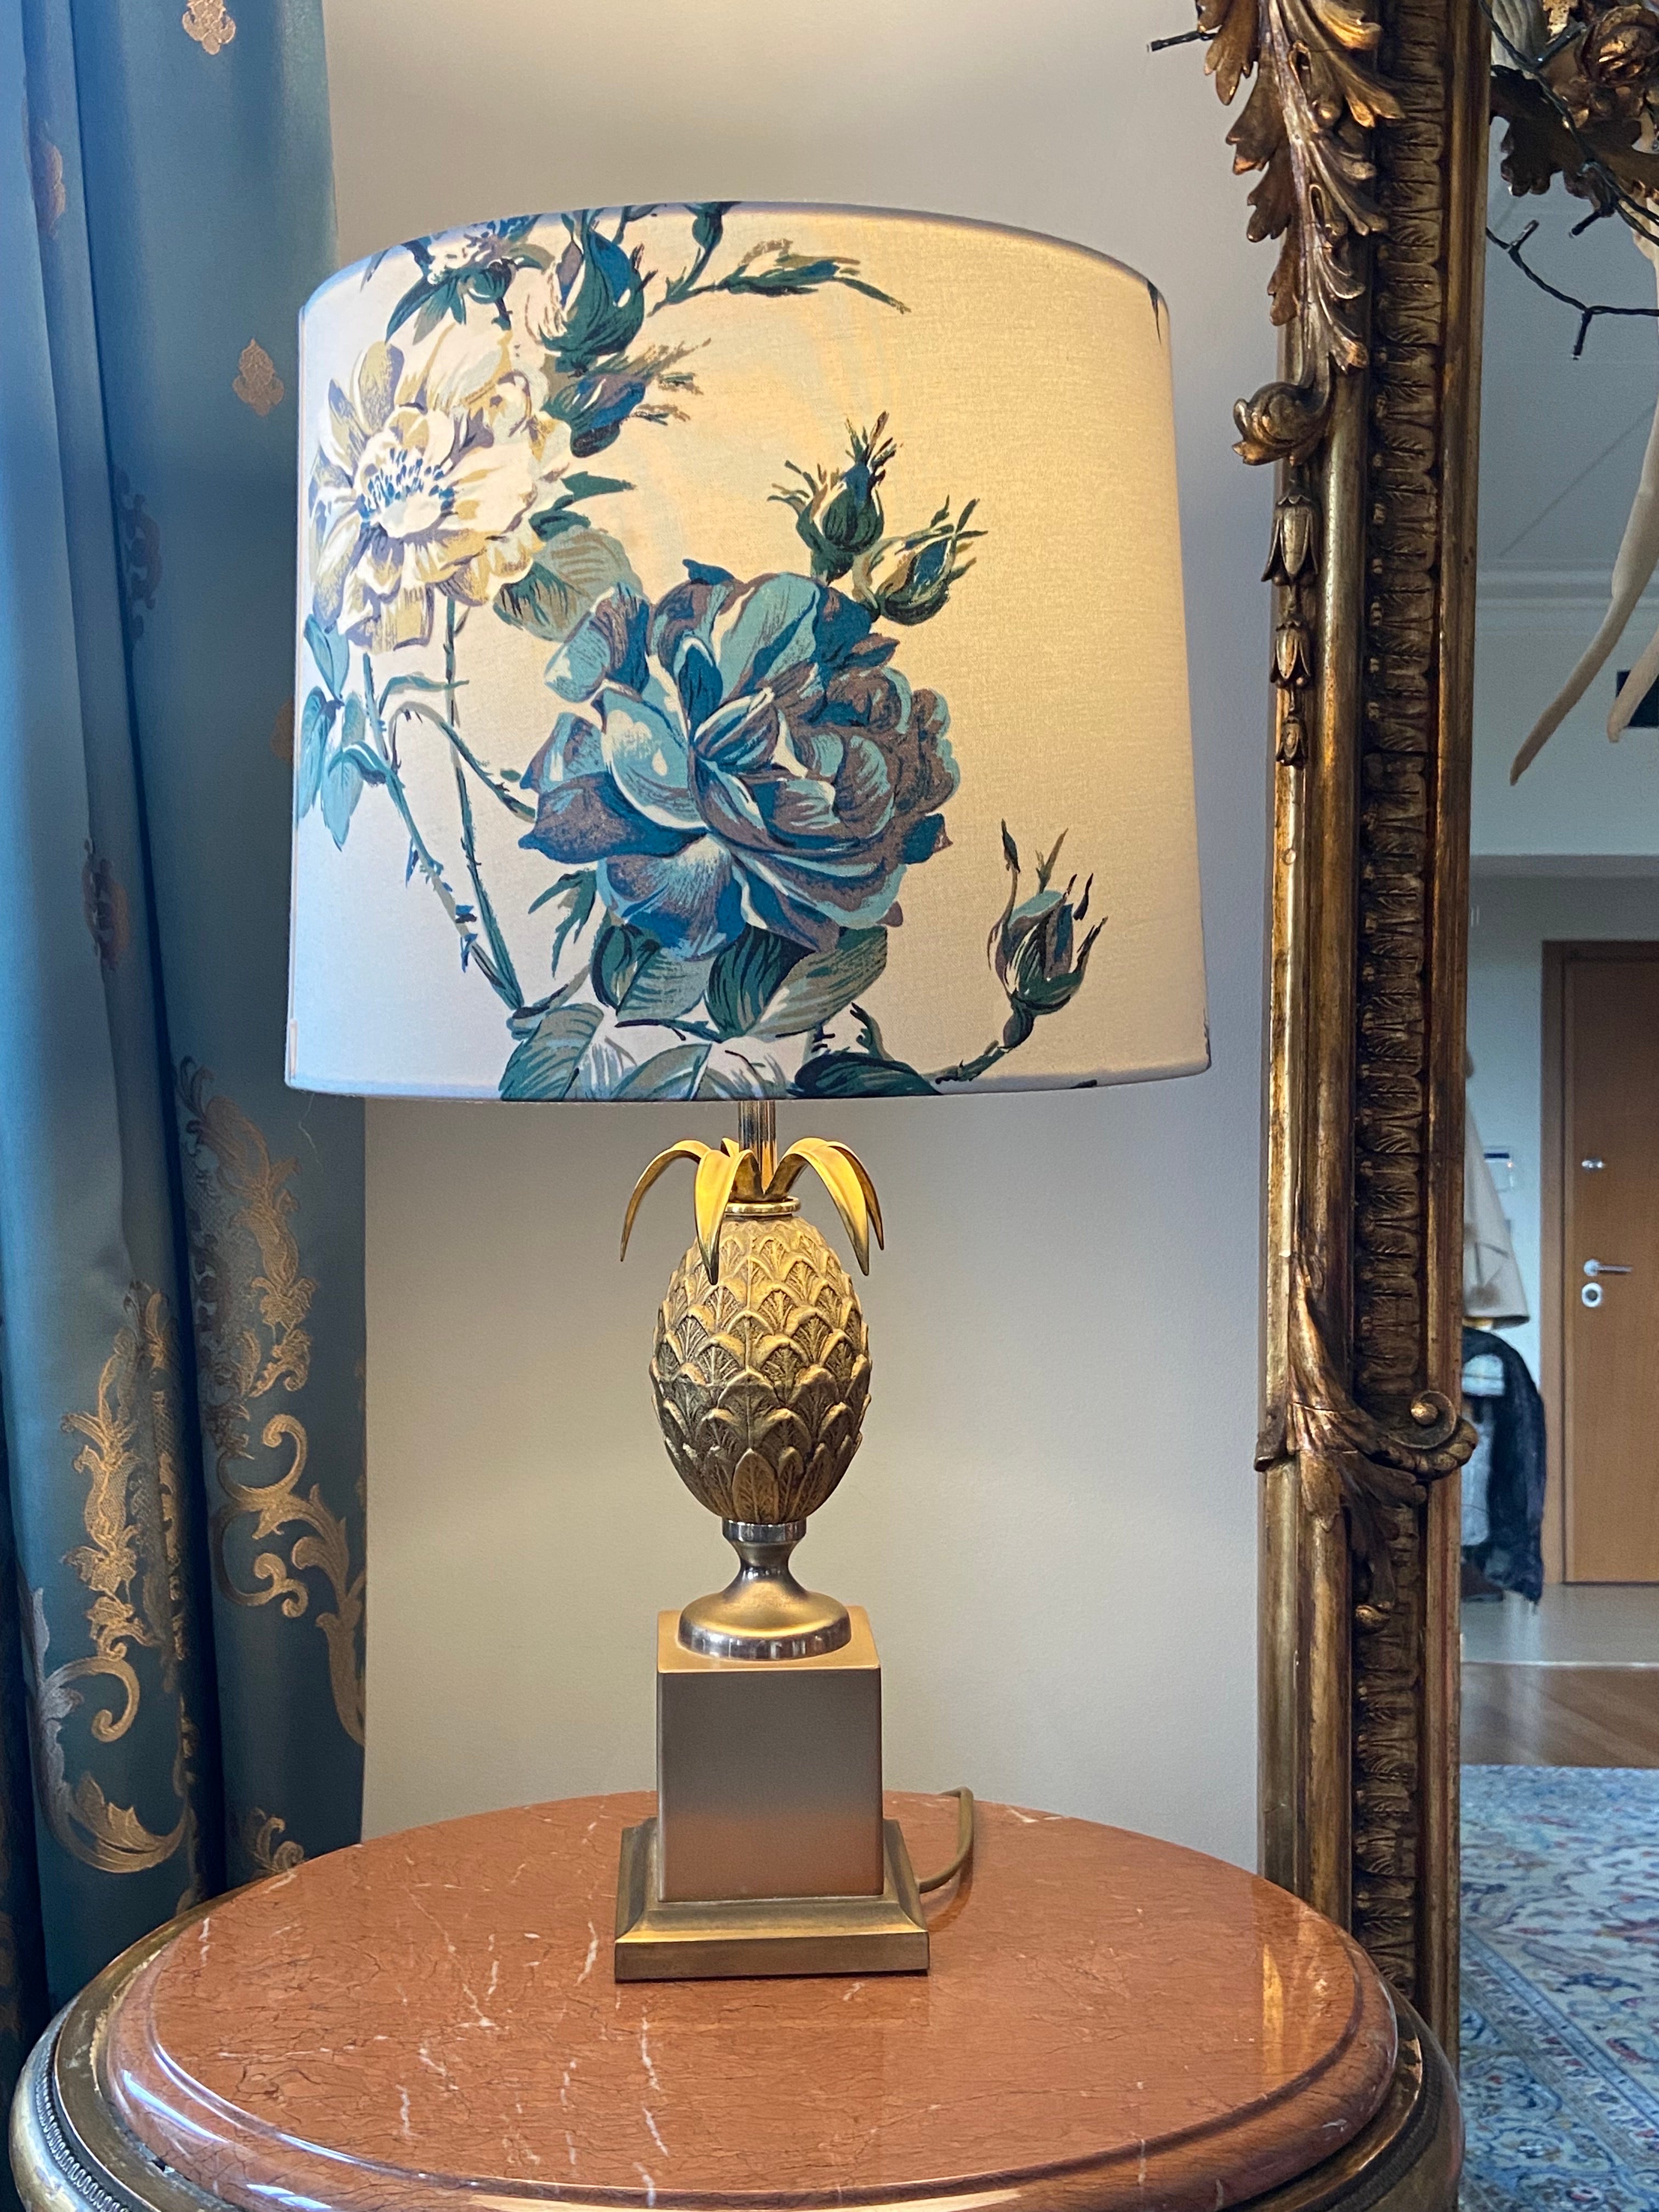 French vintage table lamp made circa 1970 by Maison Le Dauphin. It has a pineapple shape with leaves standing on a square base all made in brass. There is a mark under the base. Very good authentic condition with no restorations made. The price is